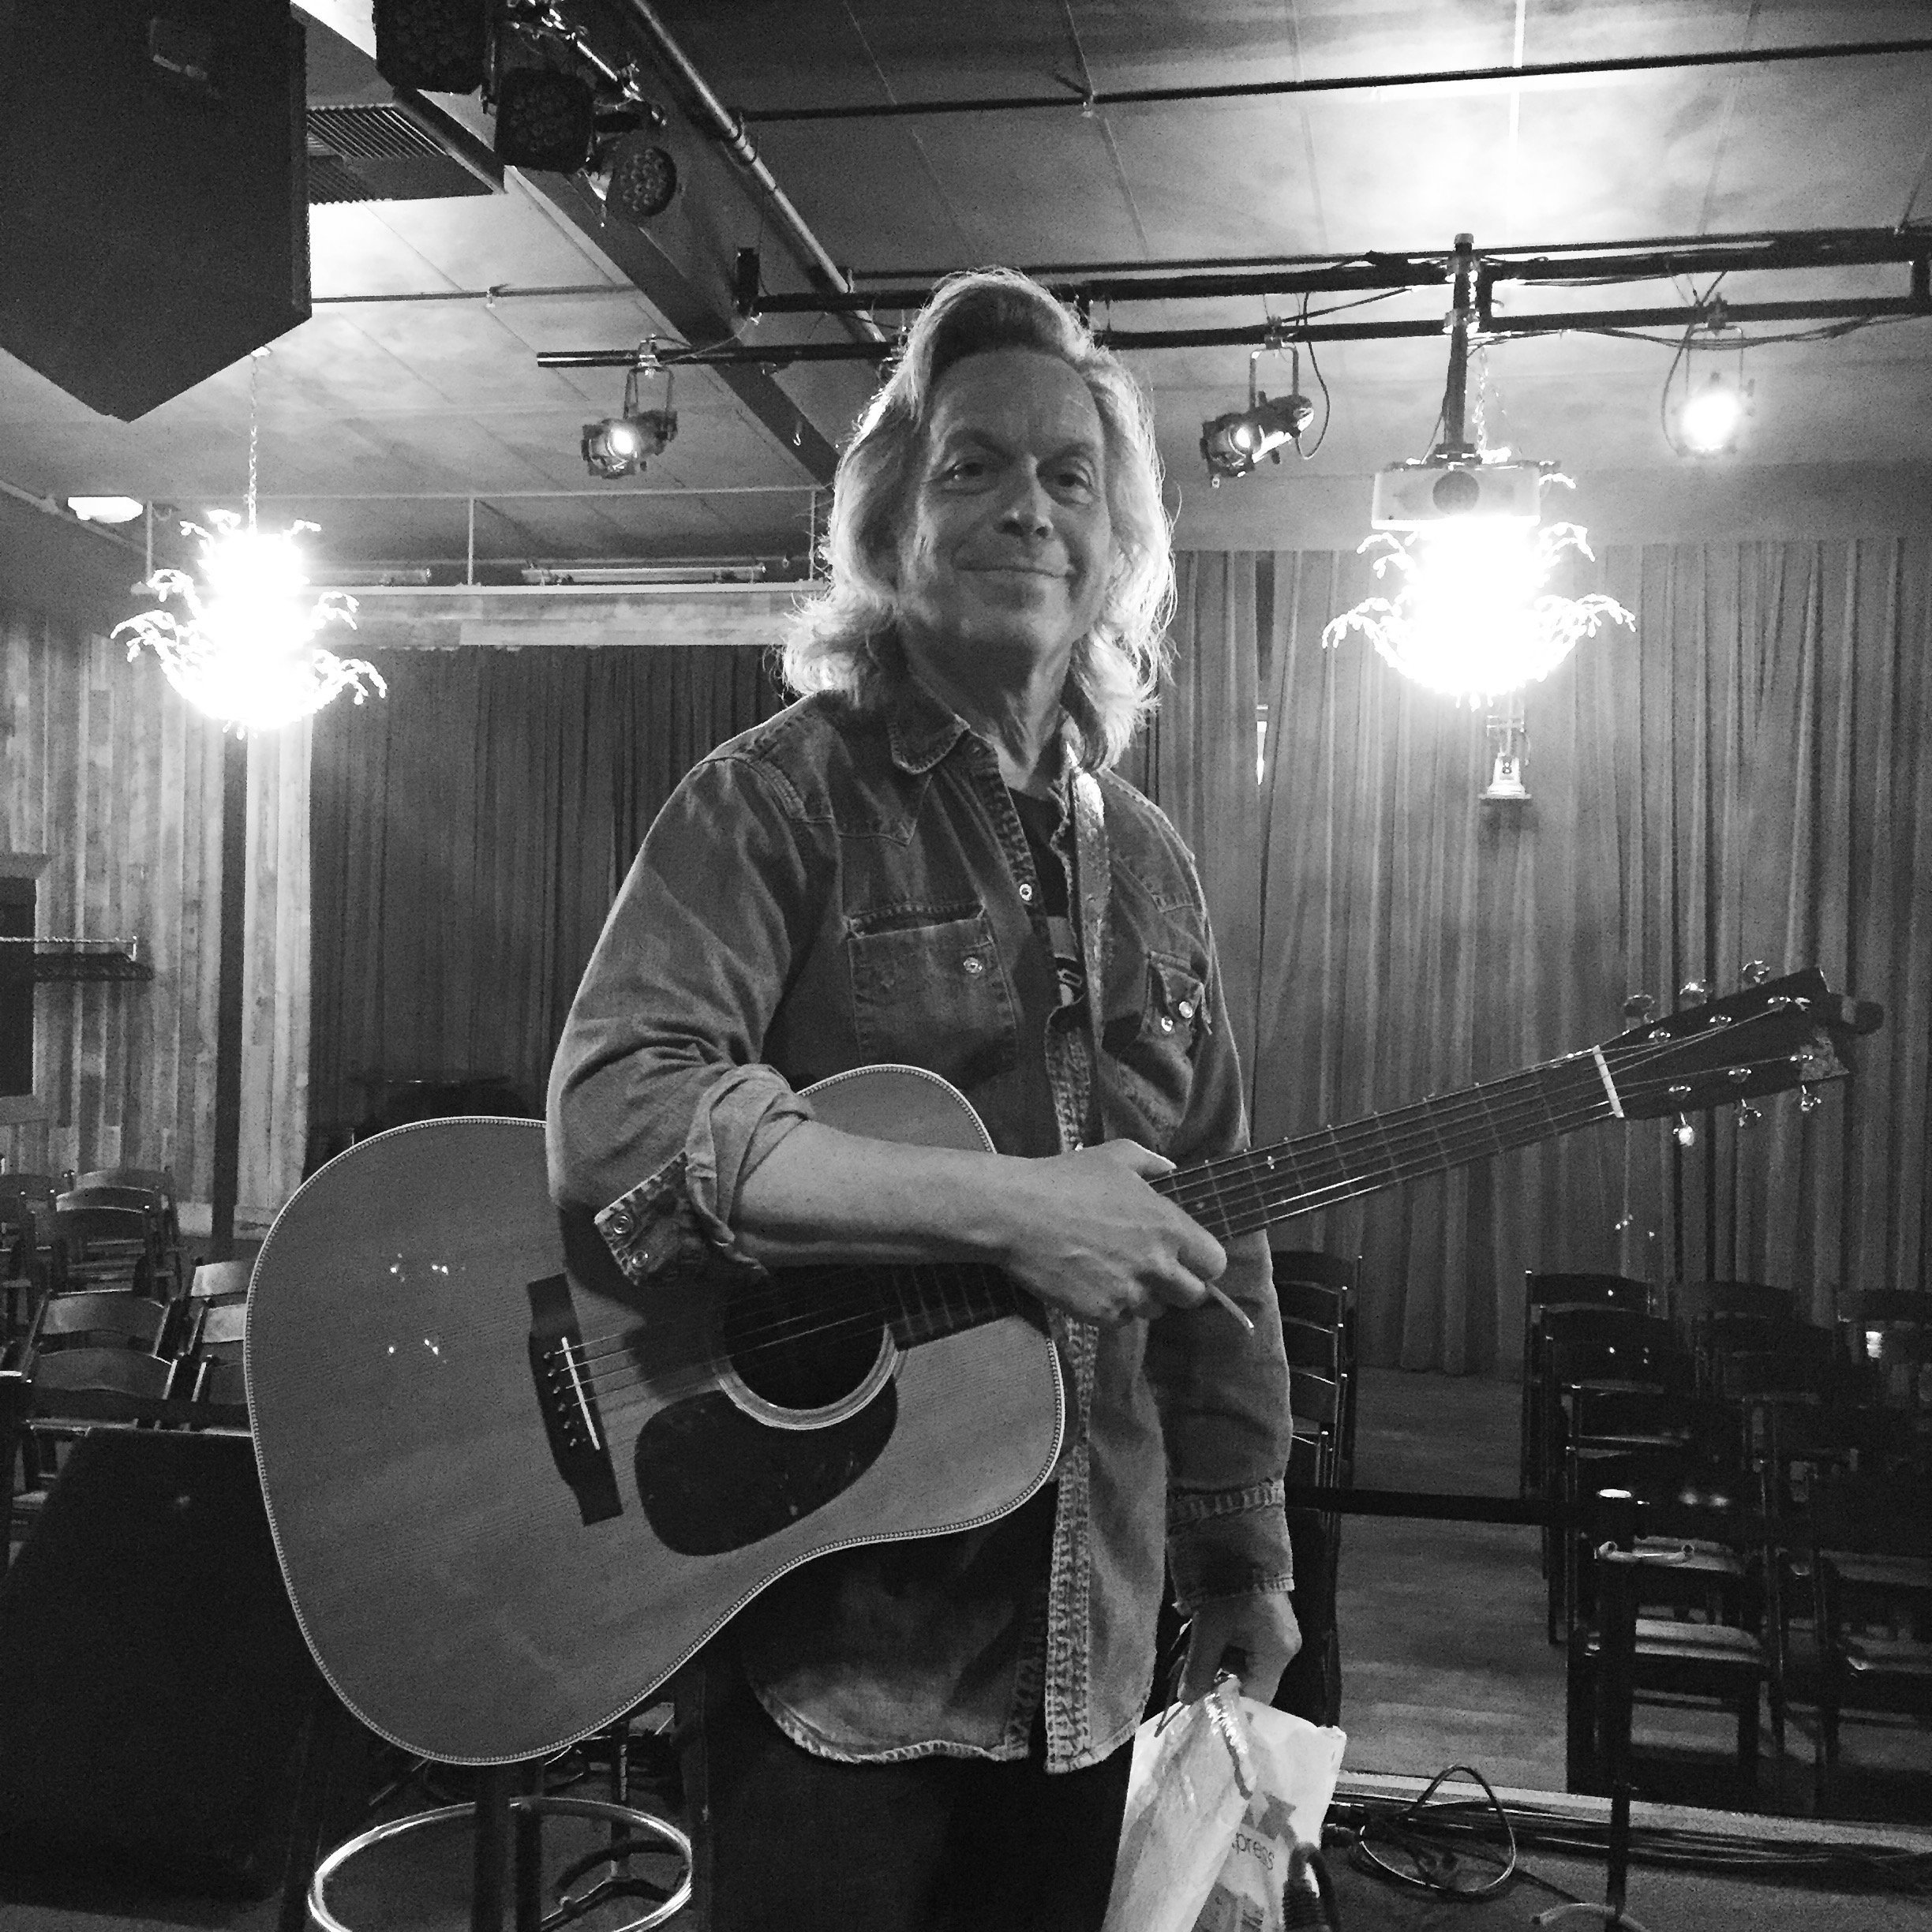 The one and only, Jim Lauderdale. Simply amazing singer, songwriter and all-around great guy!